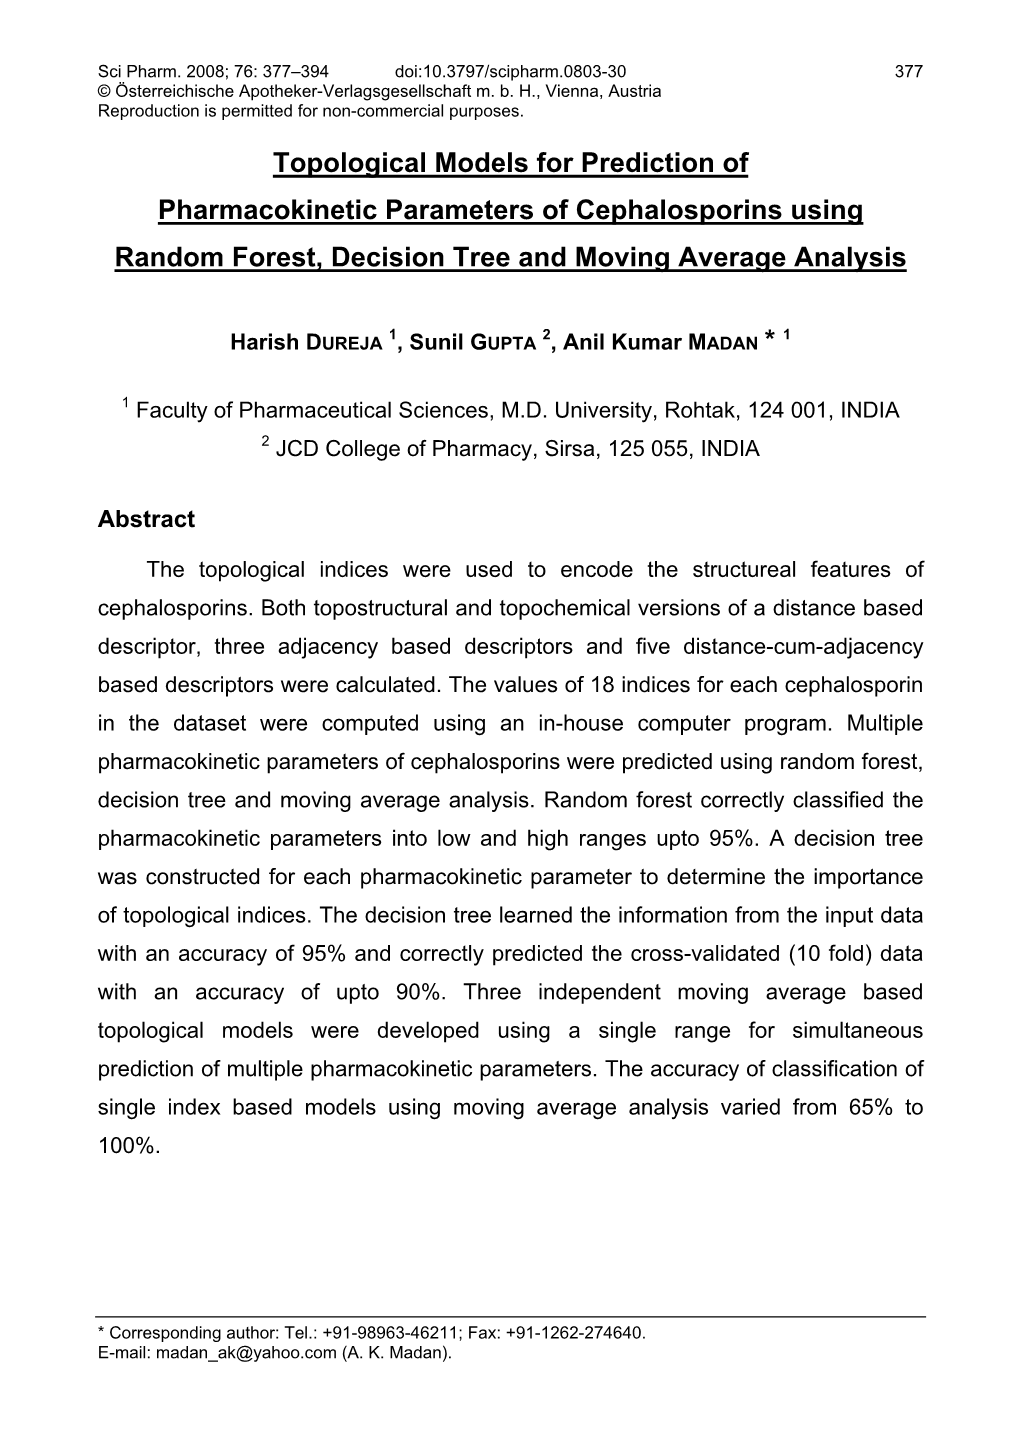 Topological Models for Prediction of Pharmacokinetic Parameters of Cephalosporins Using Random Forest, Decision Tree and Moving Average Analysis